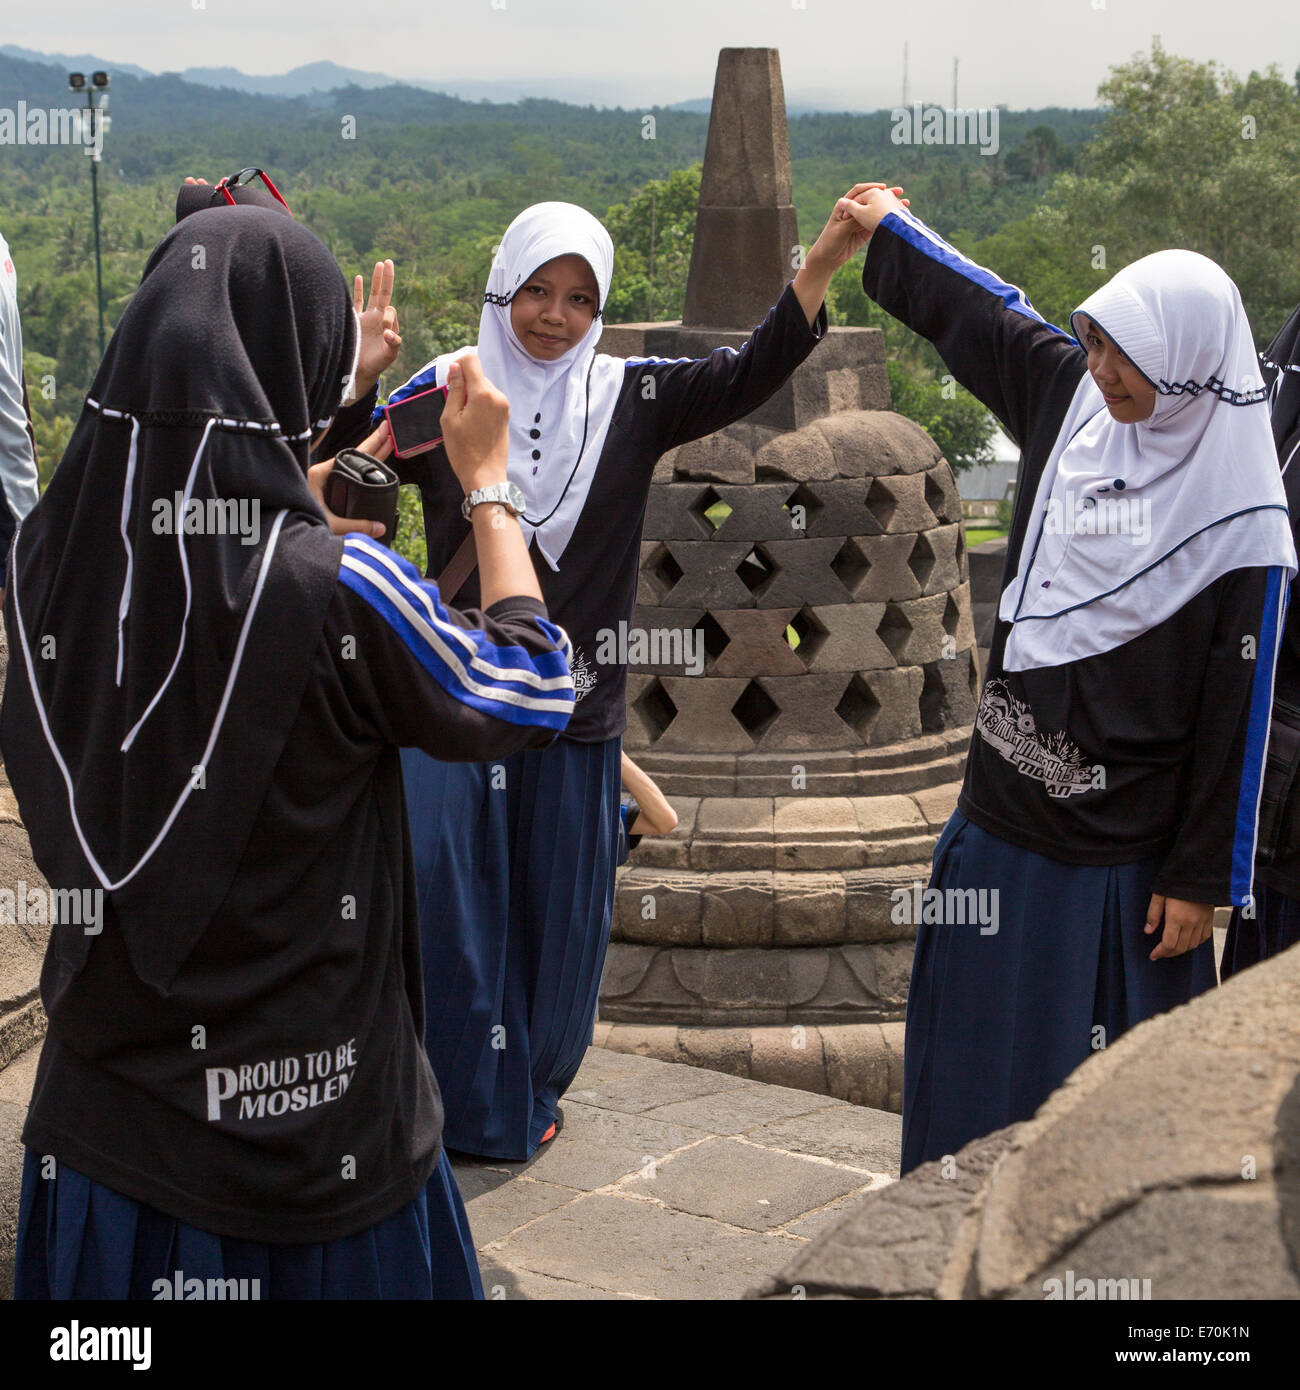 Borobudur, Java, Indonesia.  Young Indonesian Women Visiting the Temple.  'Proud to be Moslem' Written on their Clothing. Stock Photo